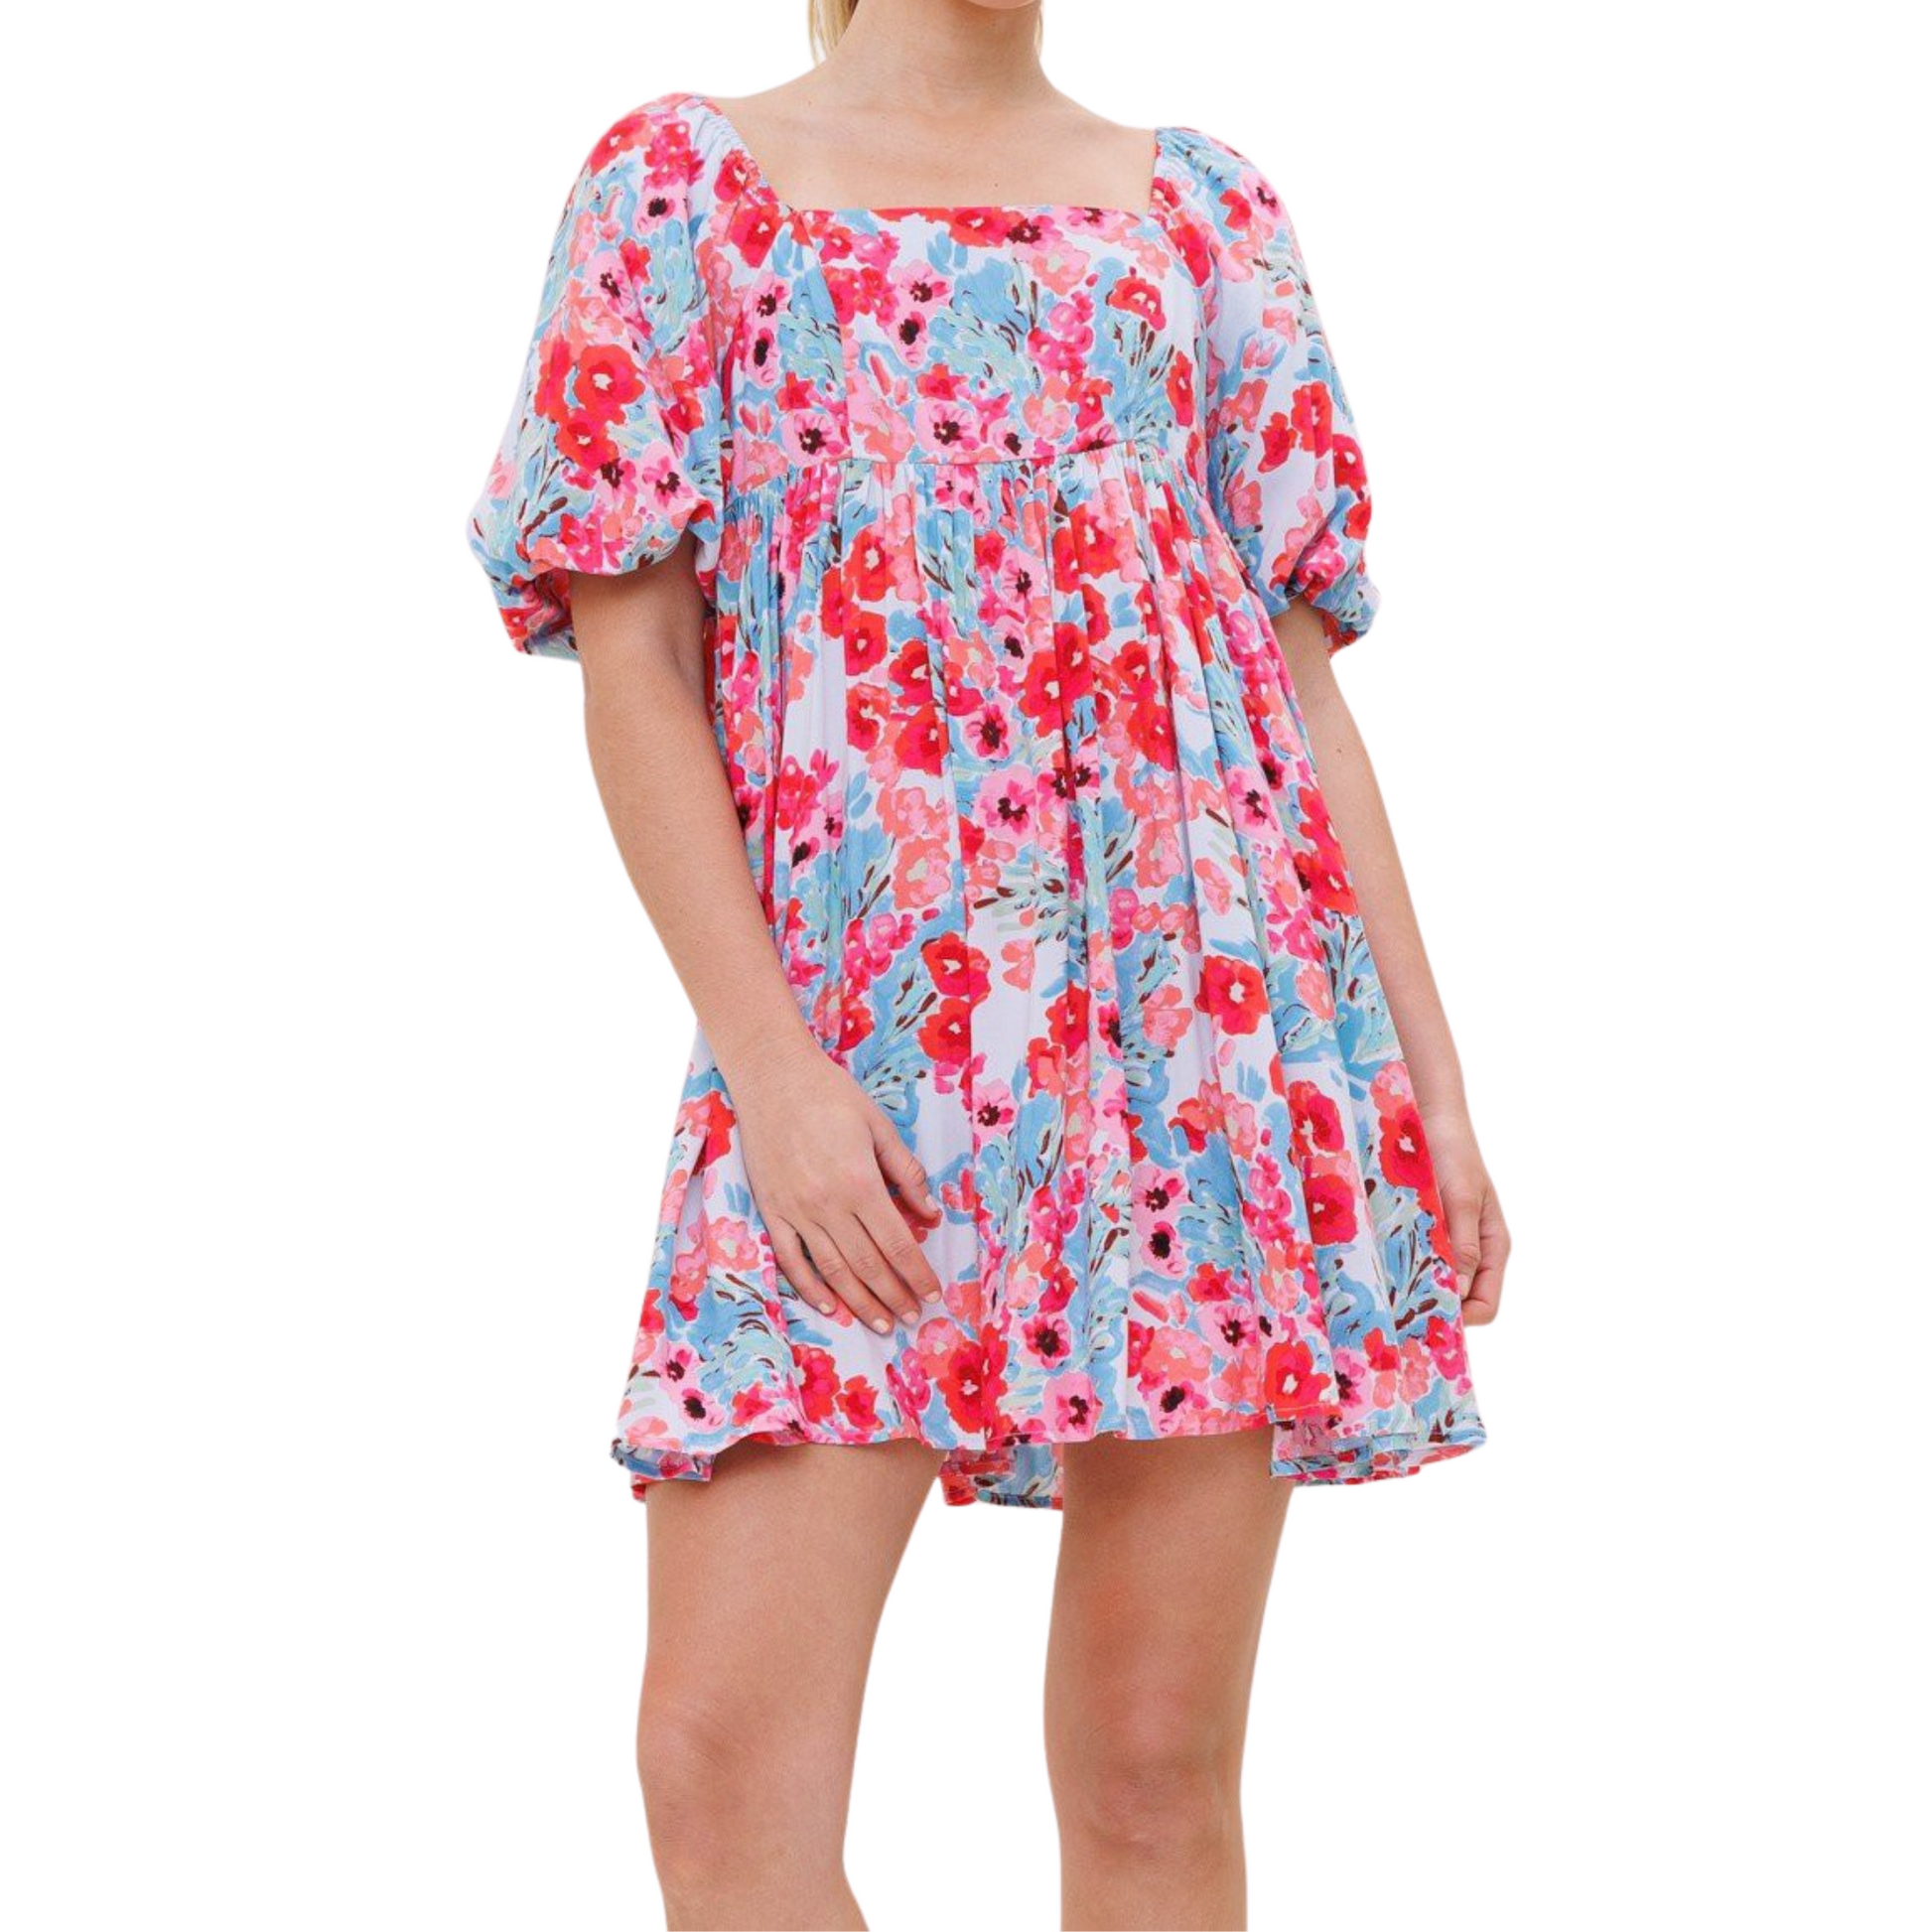 Pink, blue and white floral mini dress with balloon sleeves and square back, worn by a woman from the front.